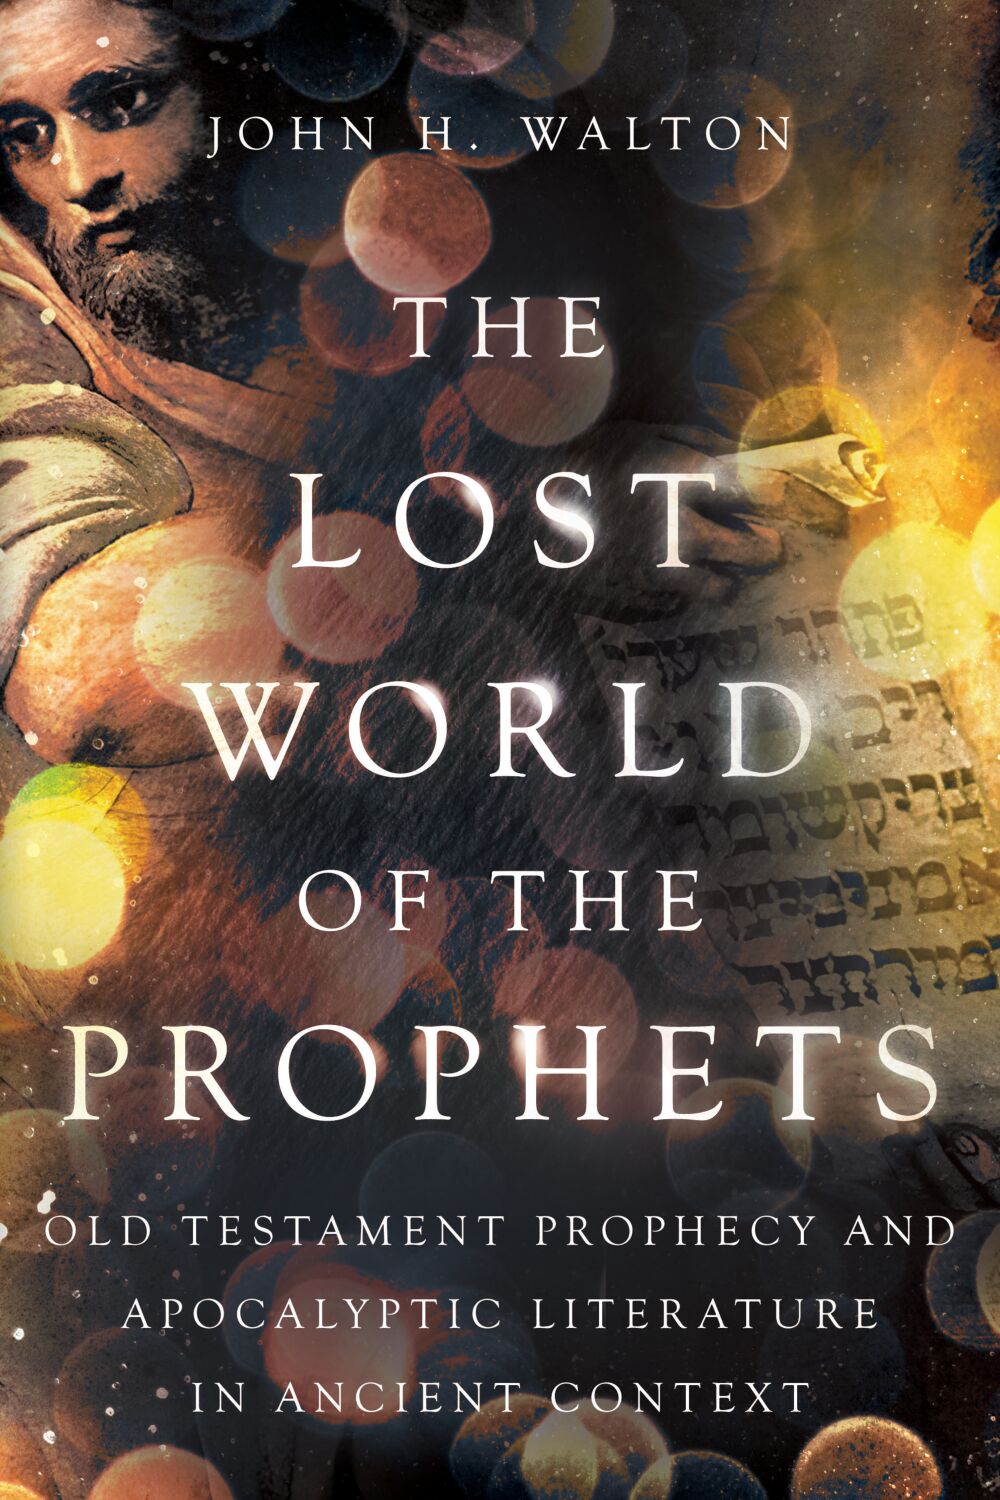 The Lost World of the Prophets by John H. Walton